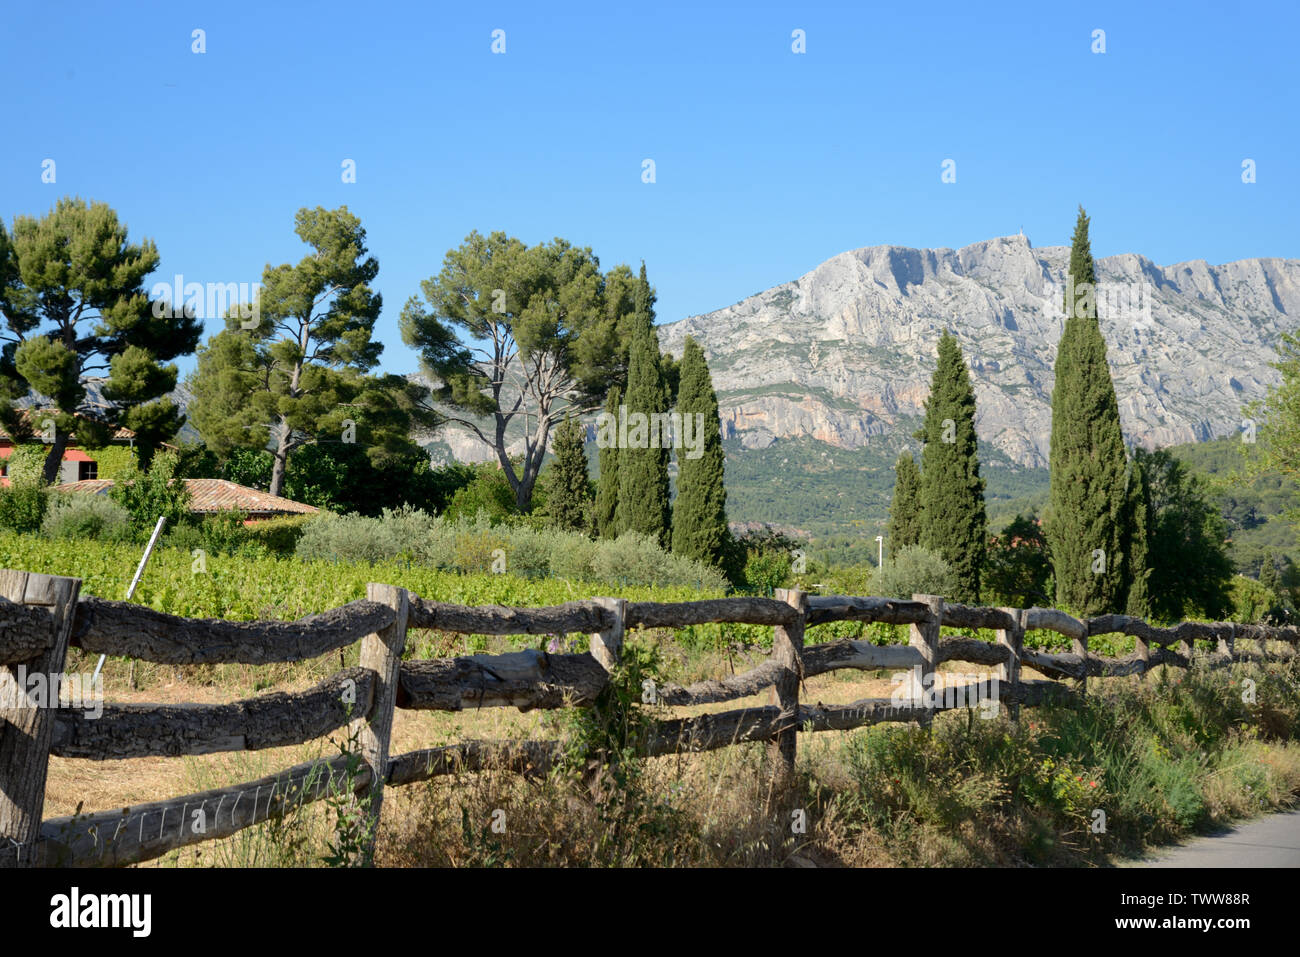 Cypress Trees and Vineyards in front of Mont Sainte-Victoire Mountain near Aix-en-Provence Provence France Stock Photo